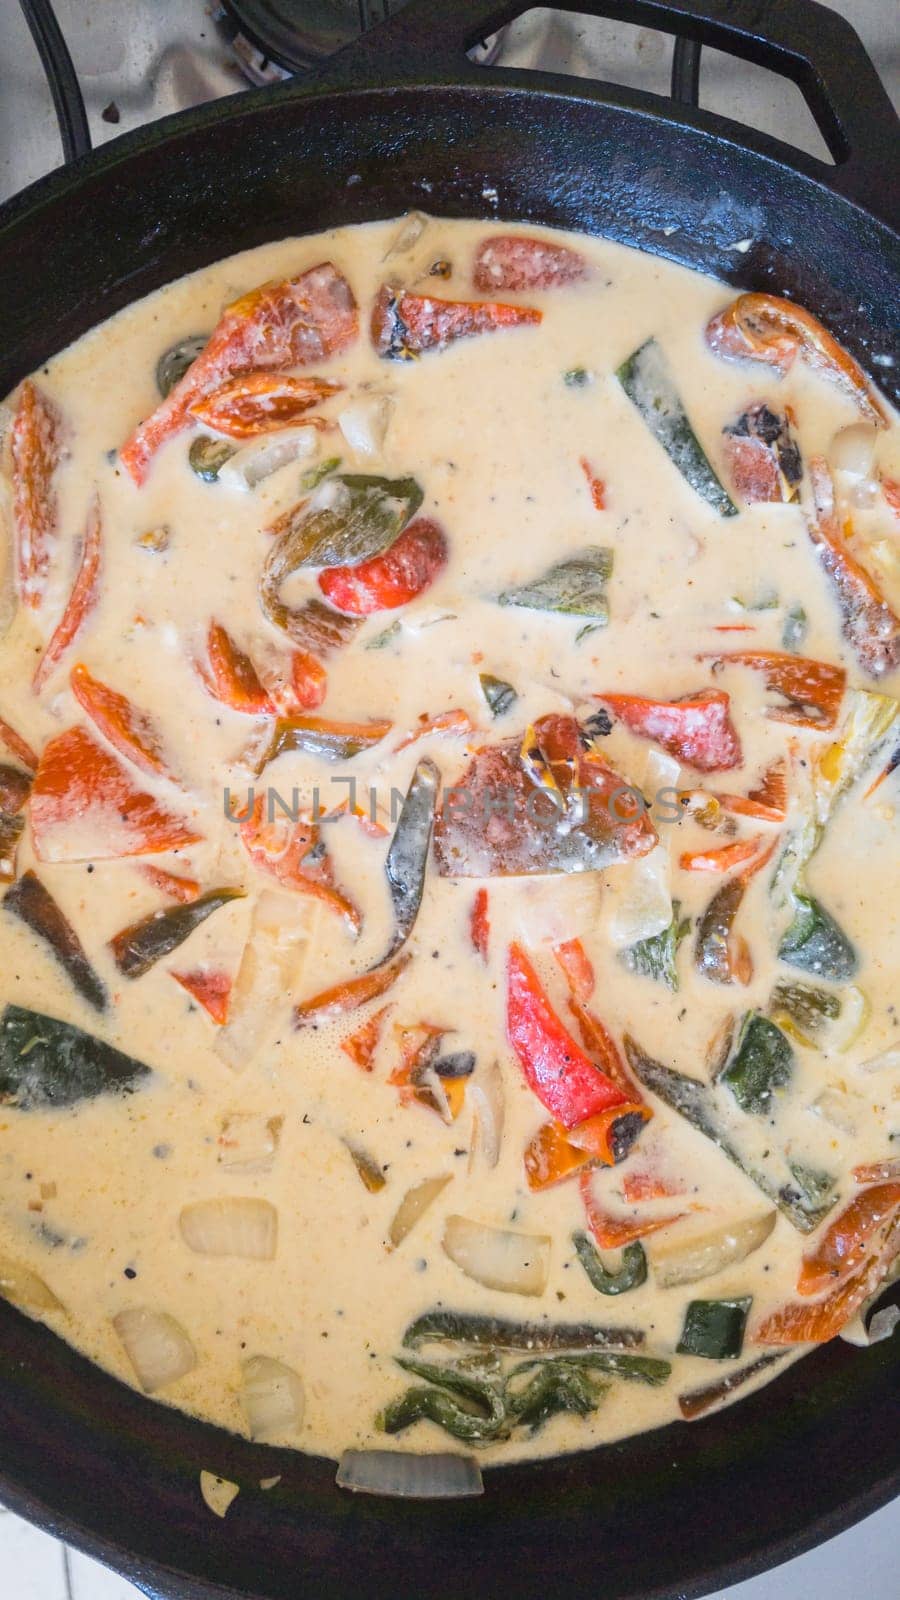 Rajas con crema, poblano chili peppers with cream in cooking pan. Mexican vegetarian food in Baja California.